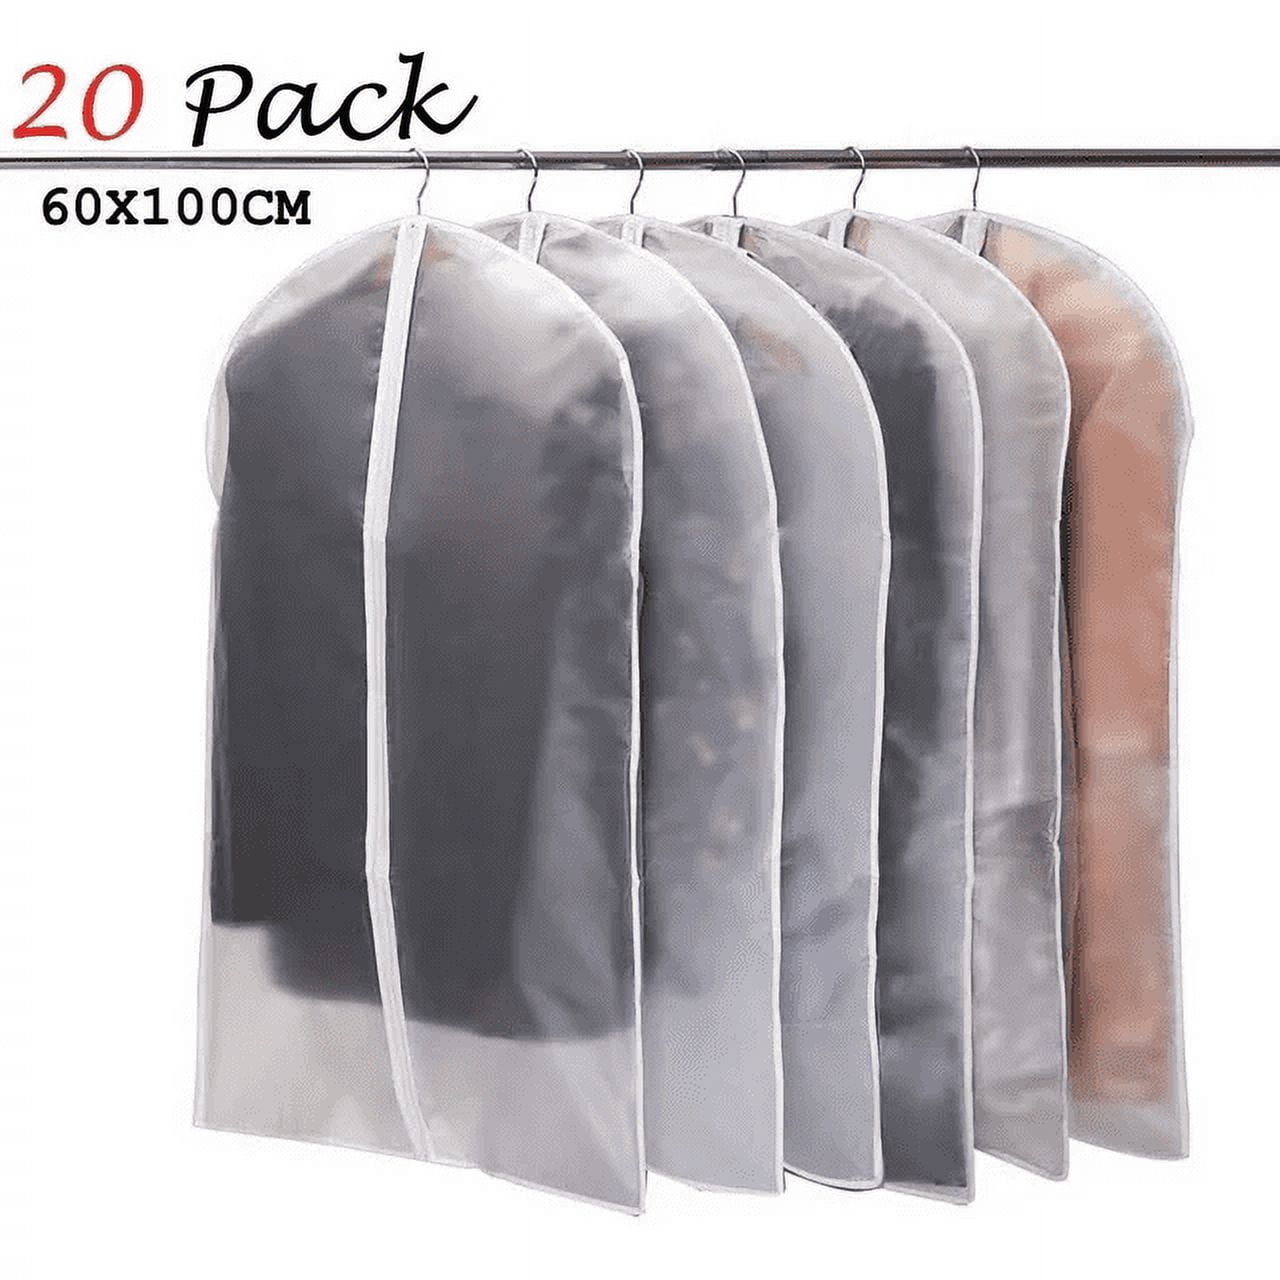 [Newest] Garment Bags for Hanging Cloths, 6.5 Gussetes 40 Moth Proof  Cover Suits Bag with Zipper for Closet Storage Travel, Clear Storage Bags